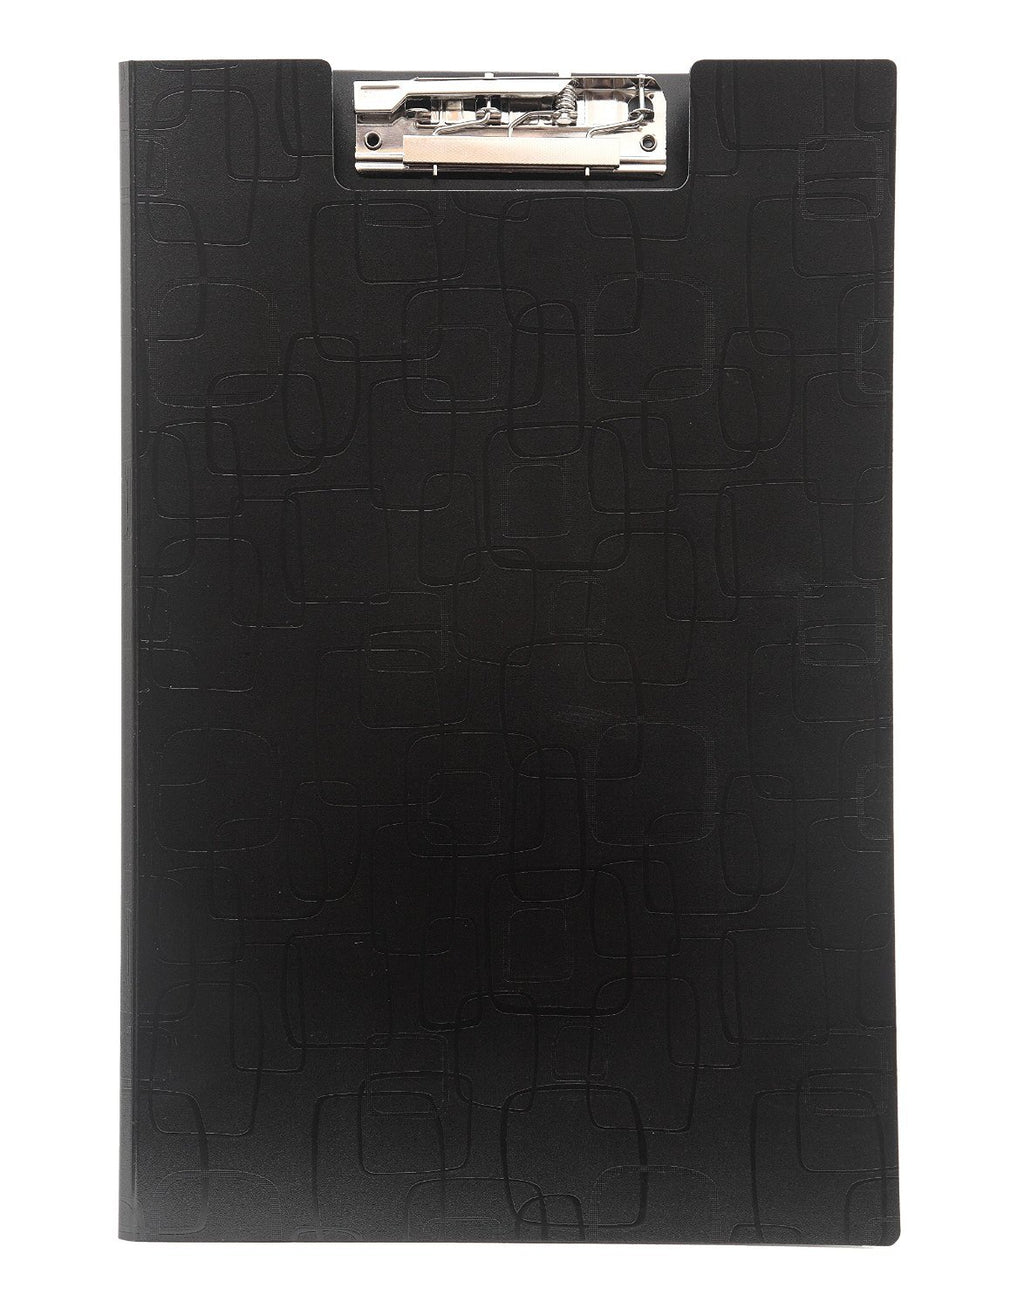 Solo PB111 Pad Board with Envelope Pocket Magic Square Black Pack of 10